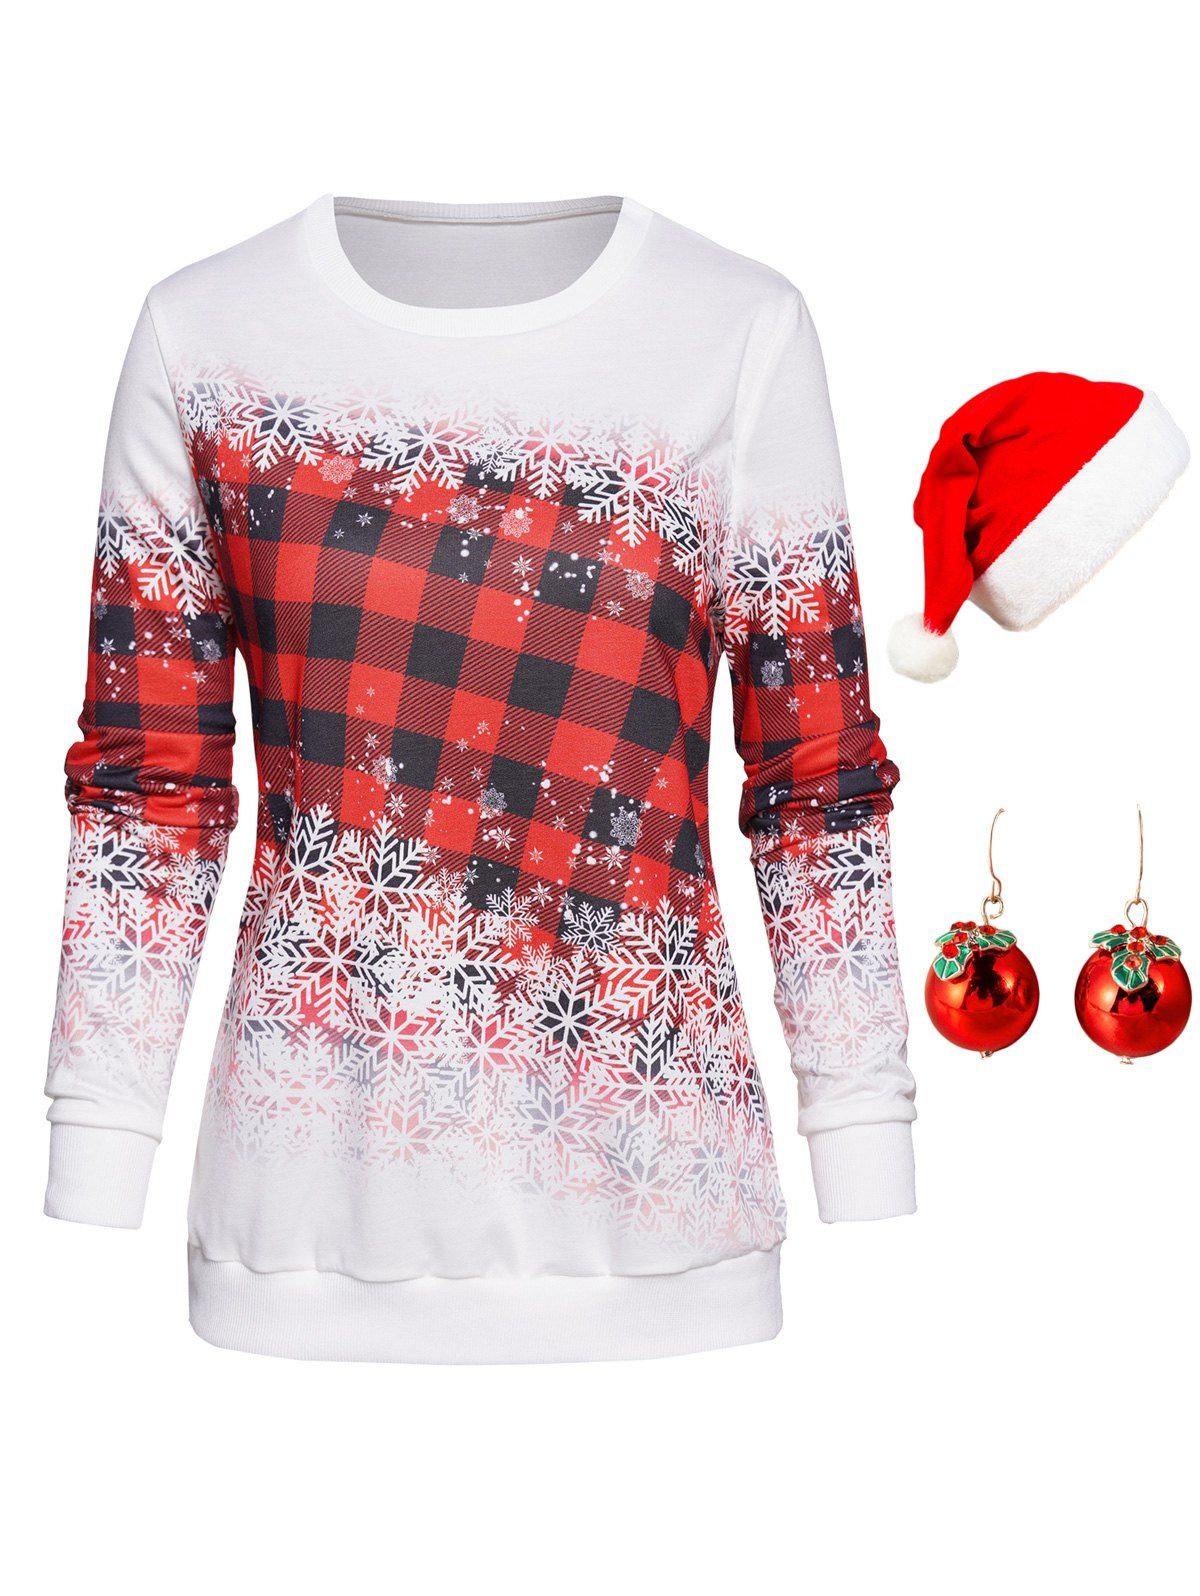 Snowflake Plaid Print Crew Neck Sweatshirt And Bell Earrings Faux Fur Hat Christmas Outfit - multicolor M